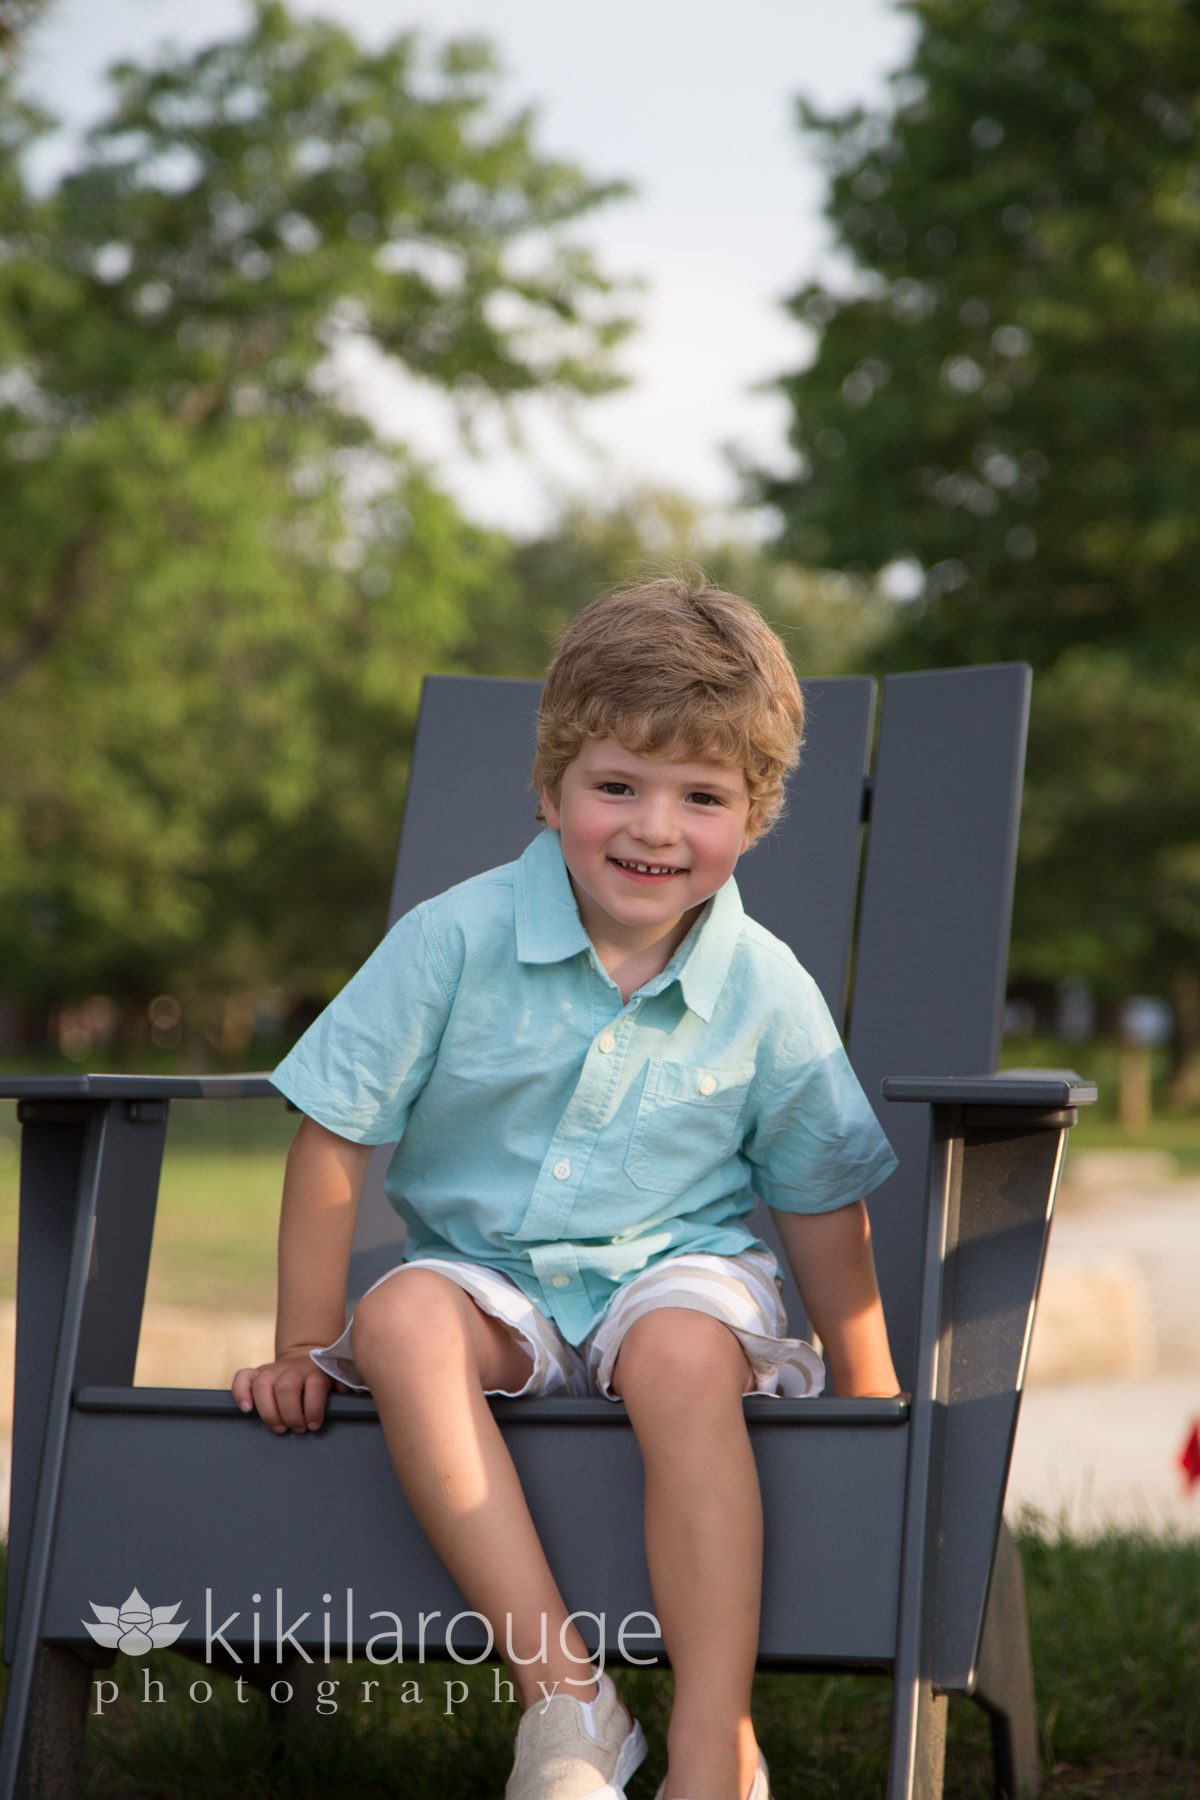 Smiling toddler in an adirondack chair